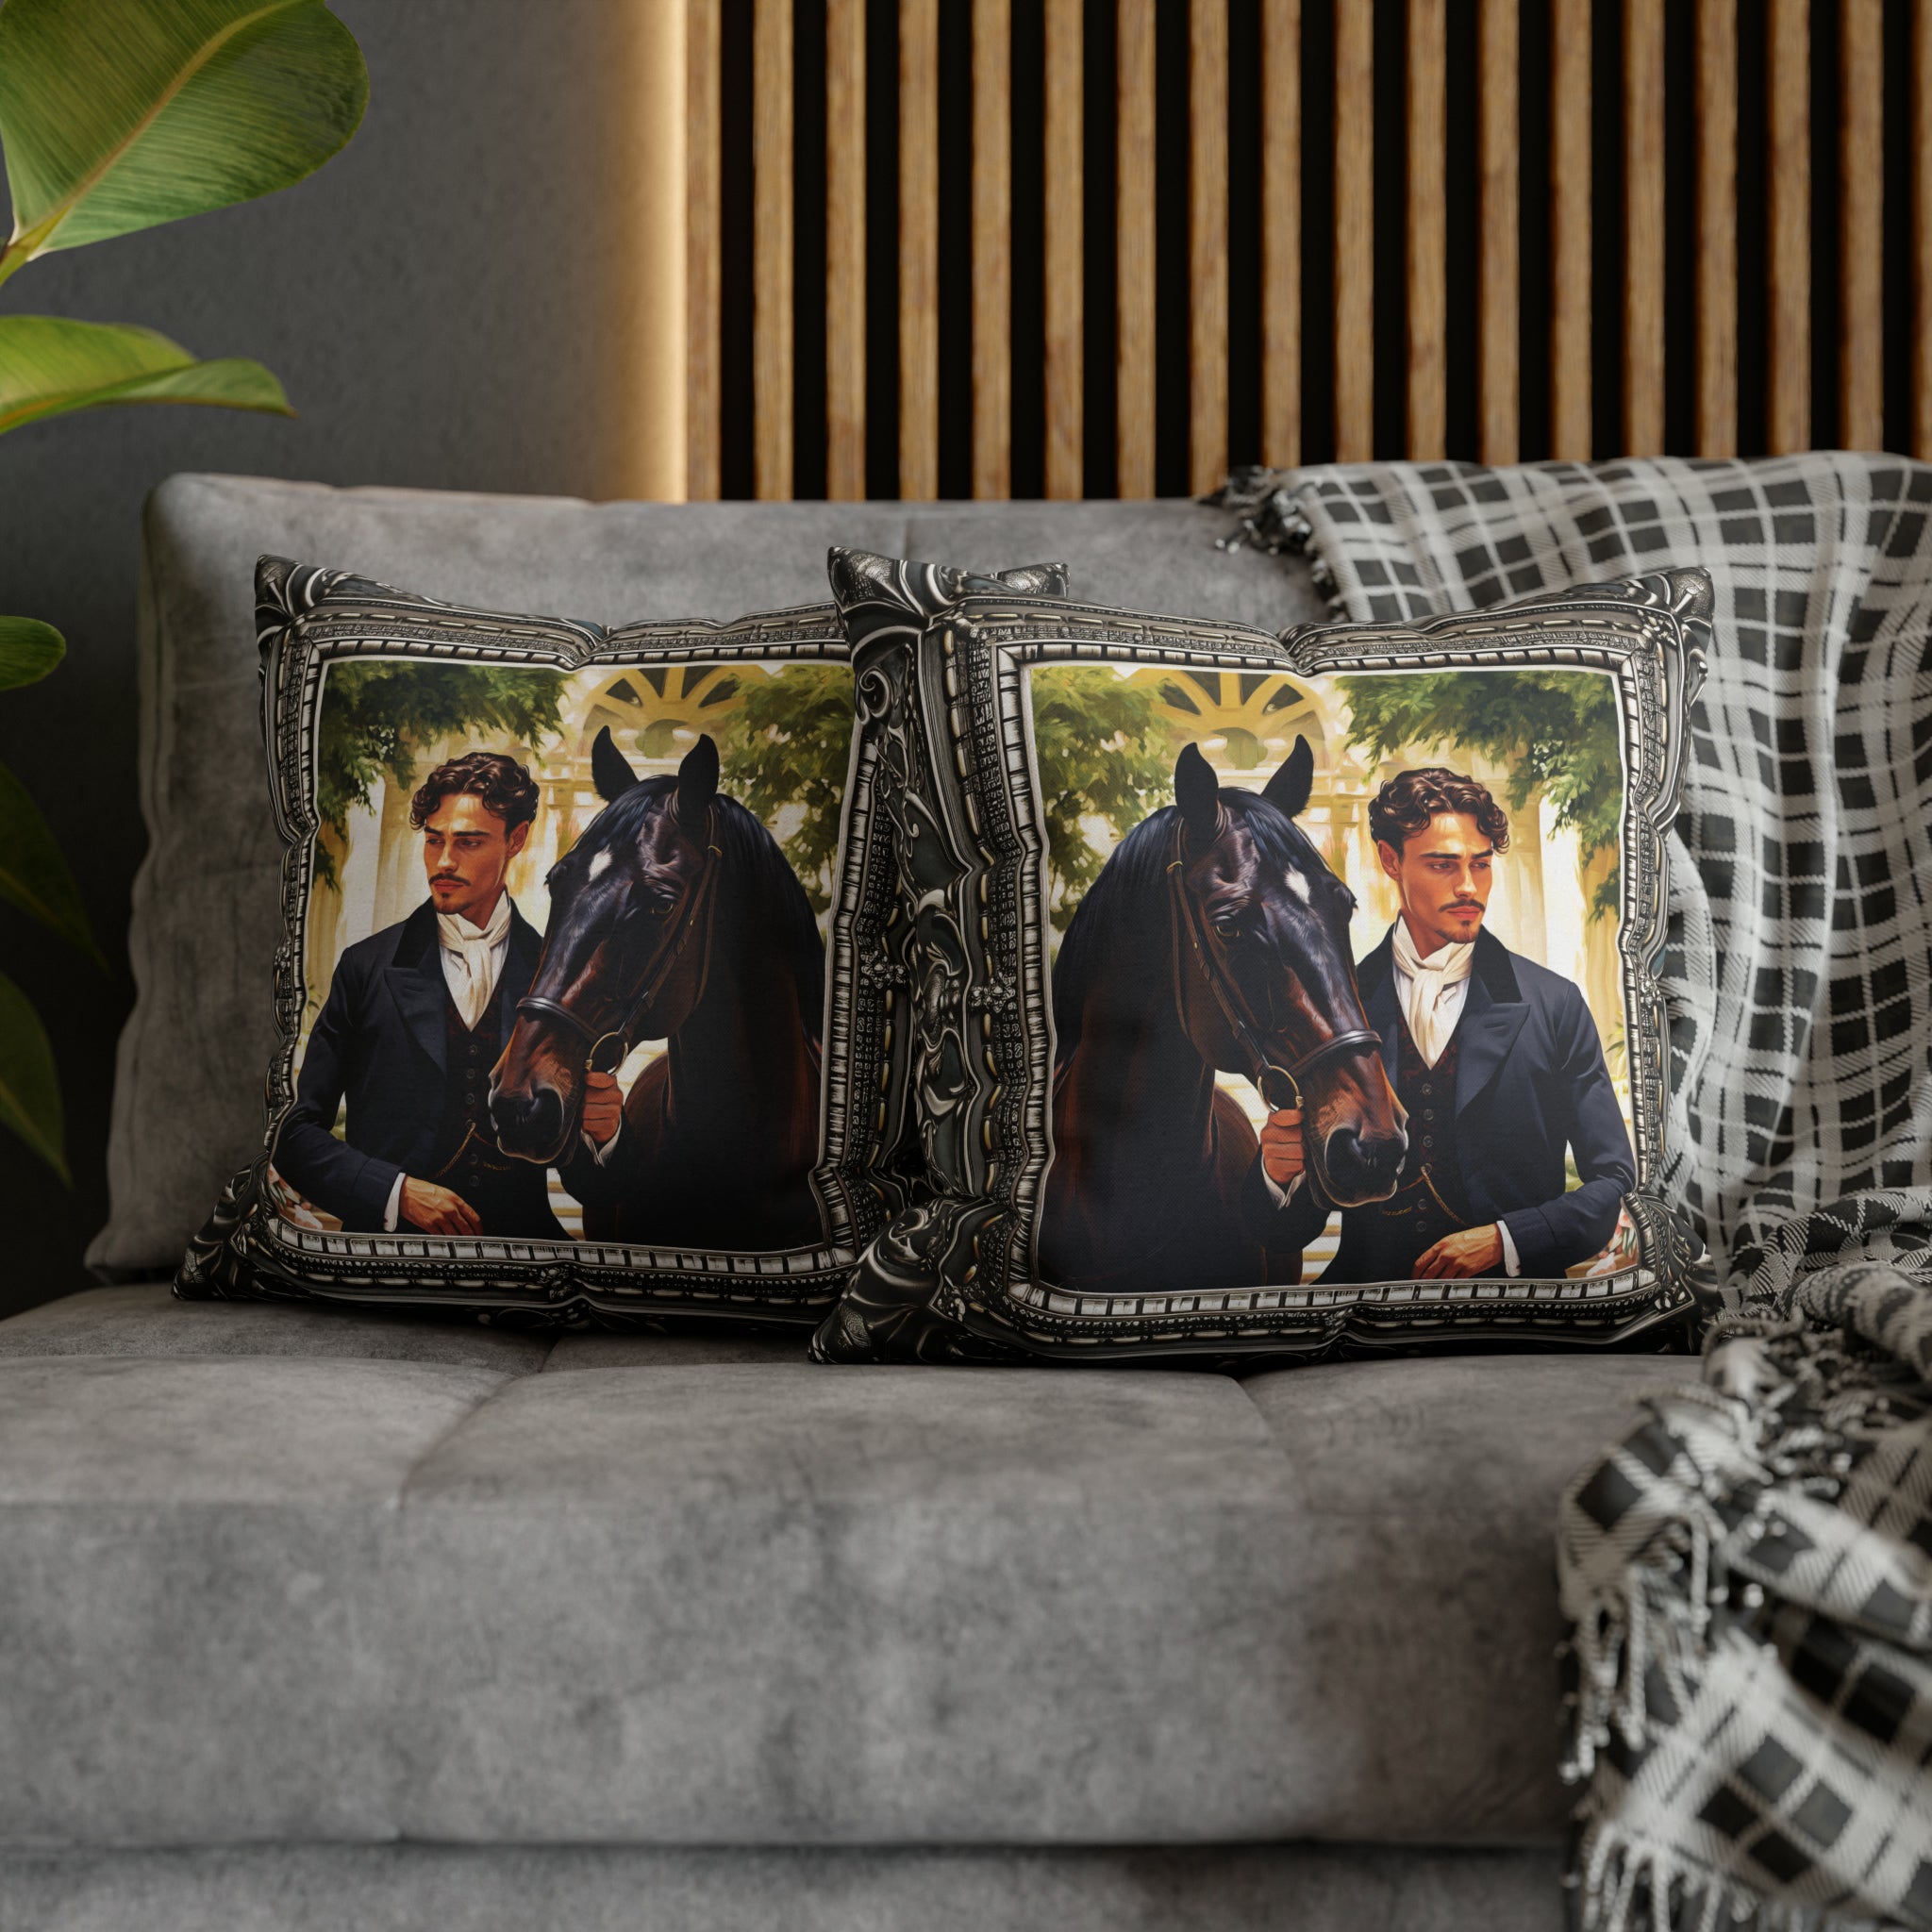 Square Pillow Case 18" x 18", CASE ONLY, no pillow form, original Art, a Painting of a young Nobleman and his Horse in an Antique Frame